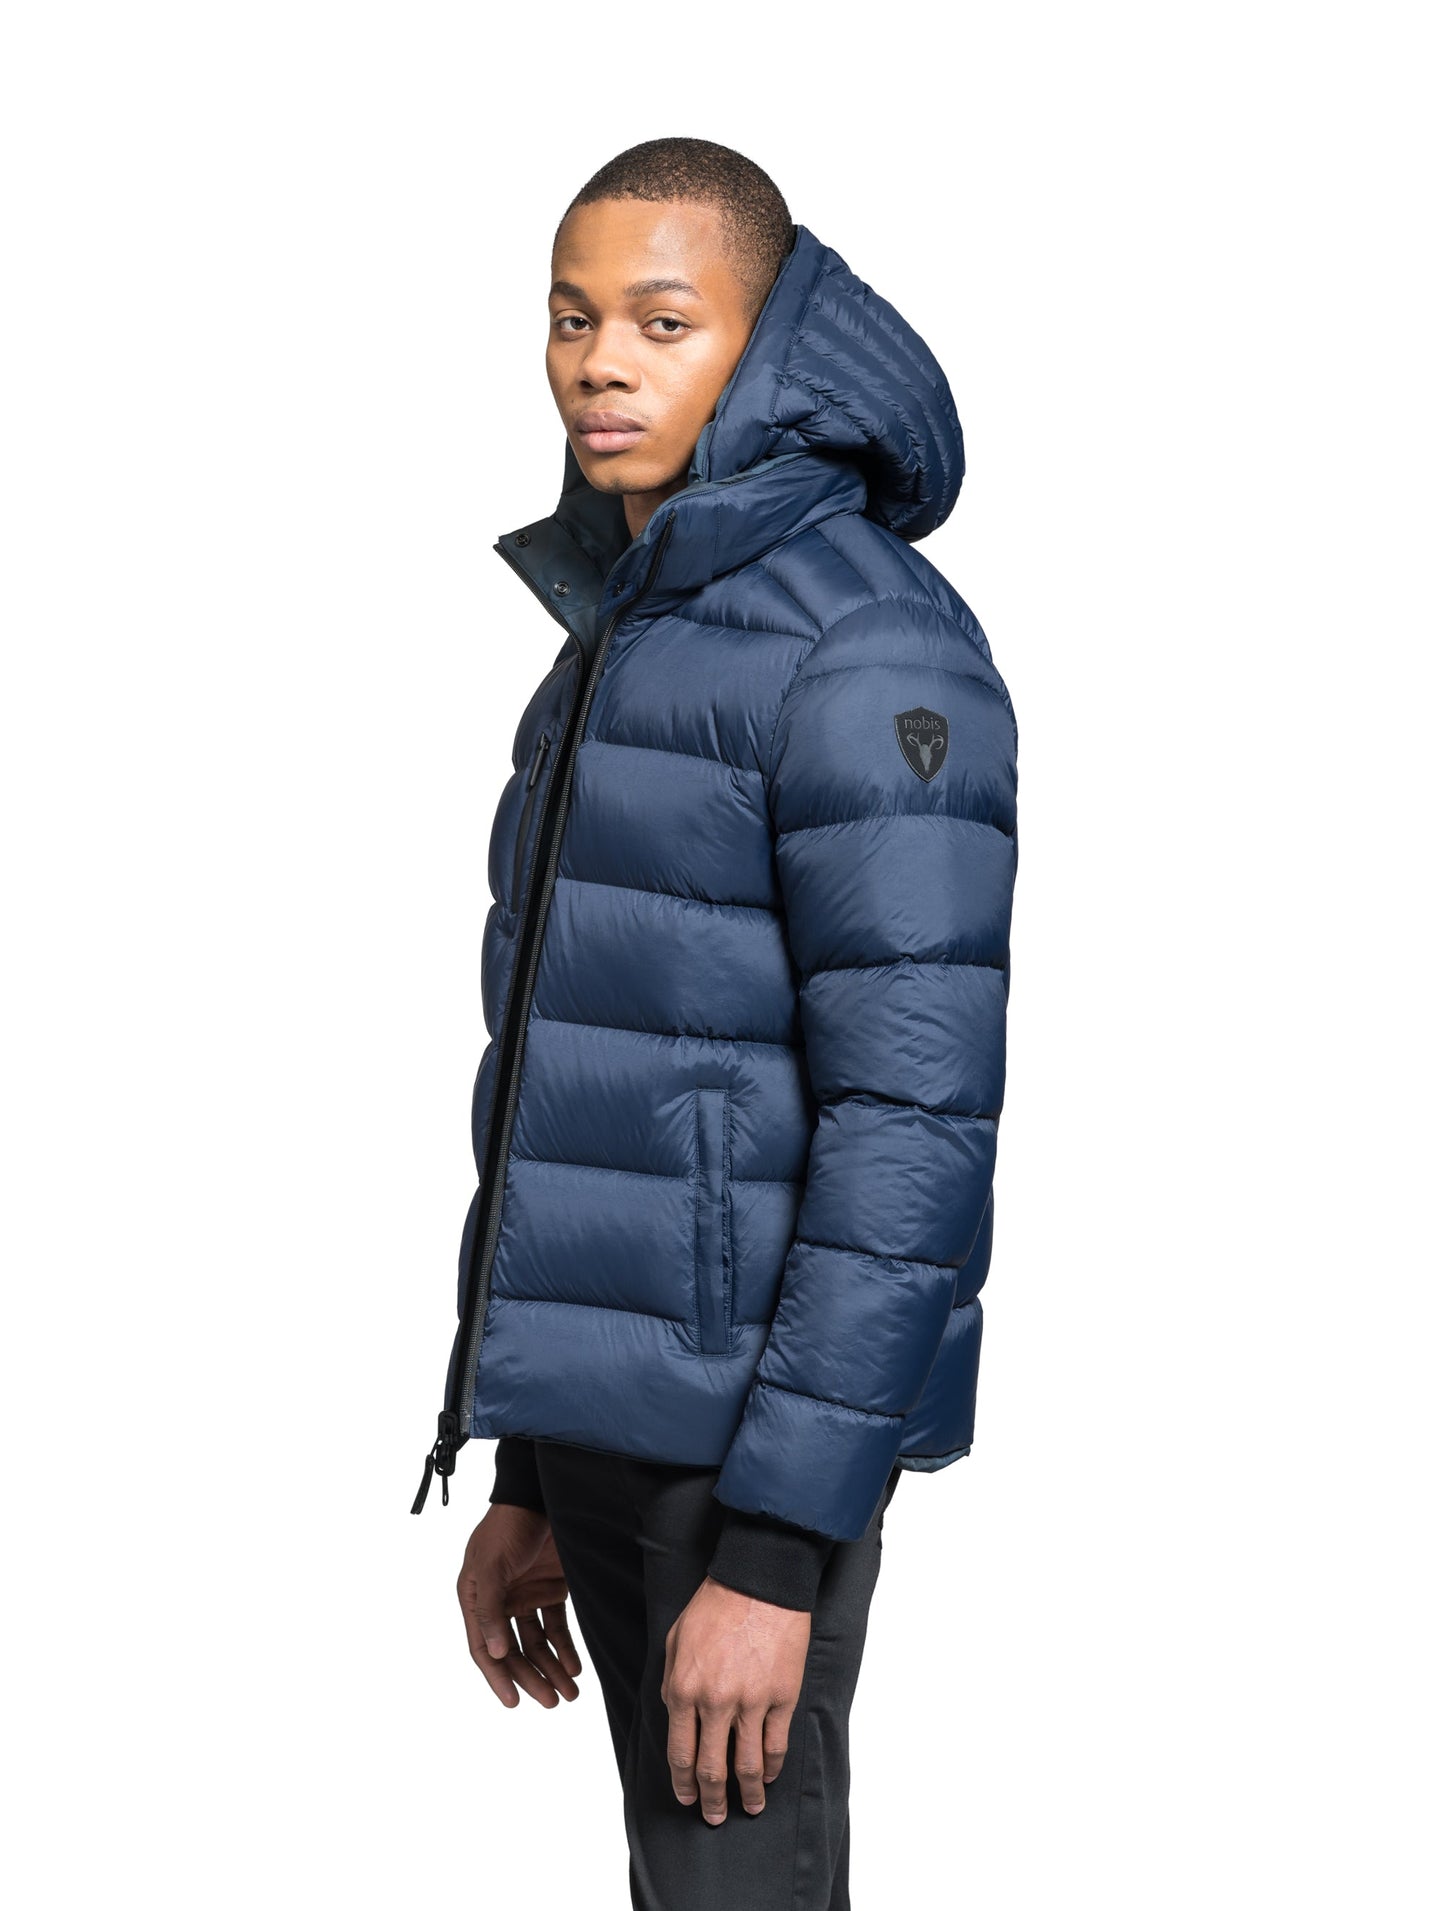 Hip length, reversible men's down filled jacket with removable hood in Navy Camo